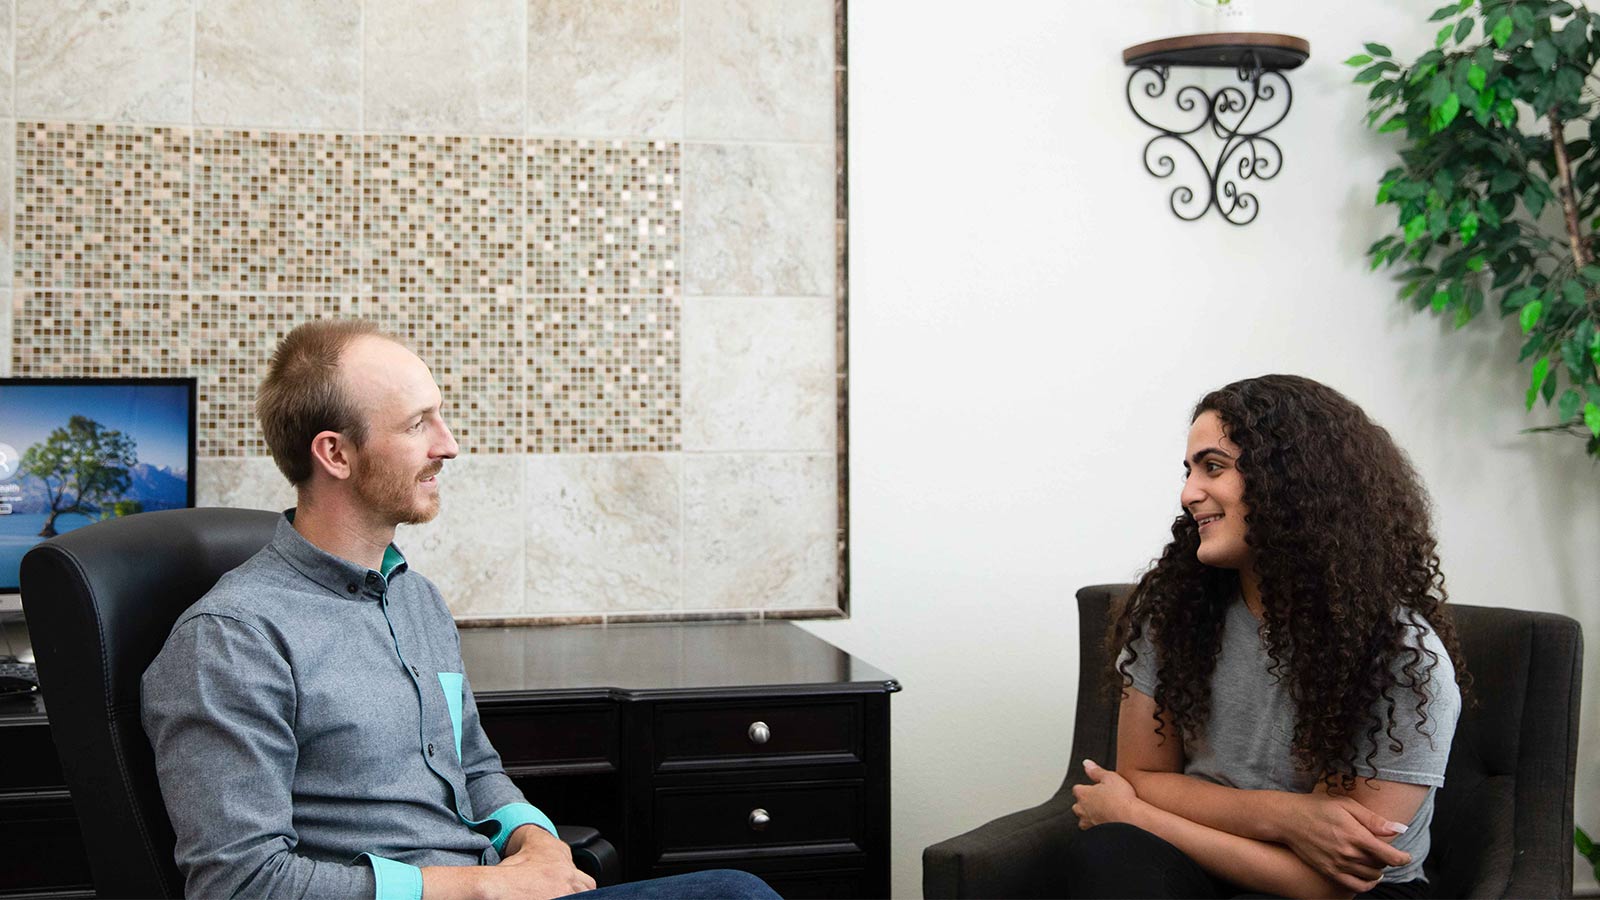 A man and a woman having a conversation in an office with modern furnishings and a decorative tile wall.